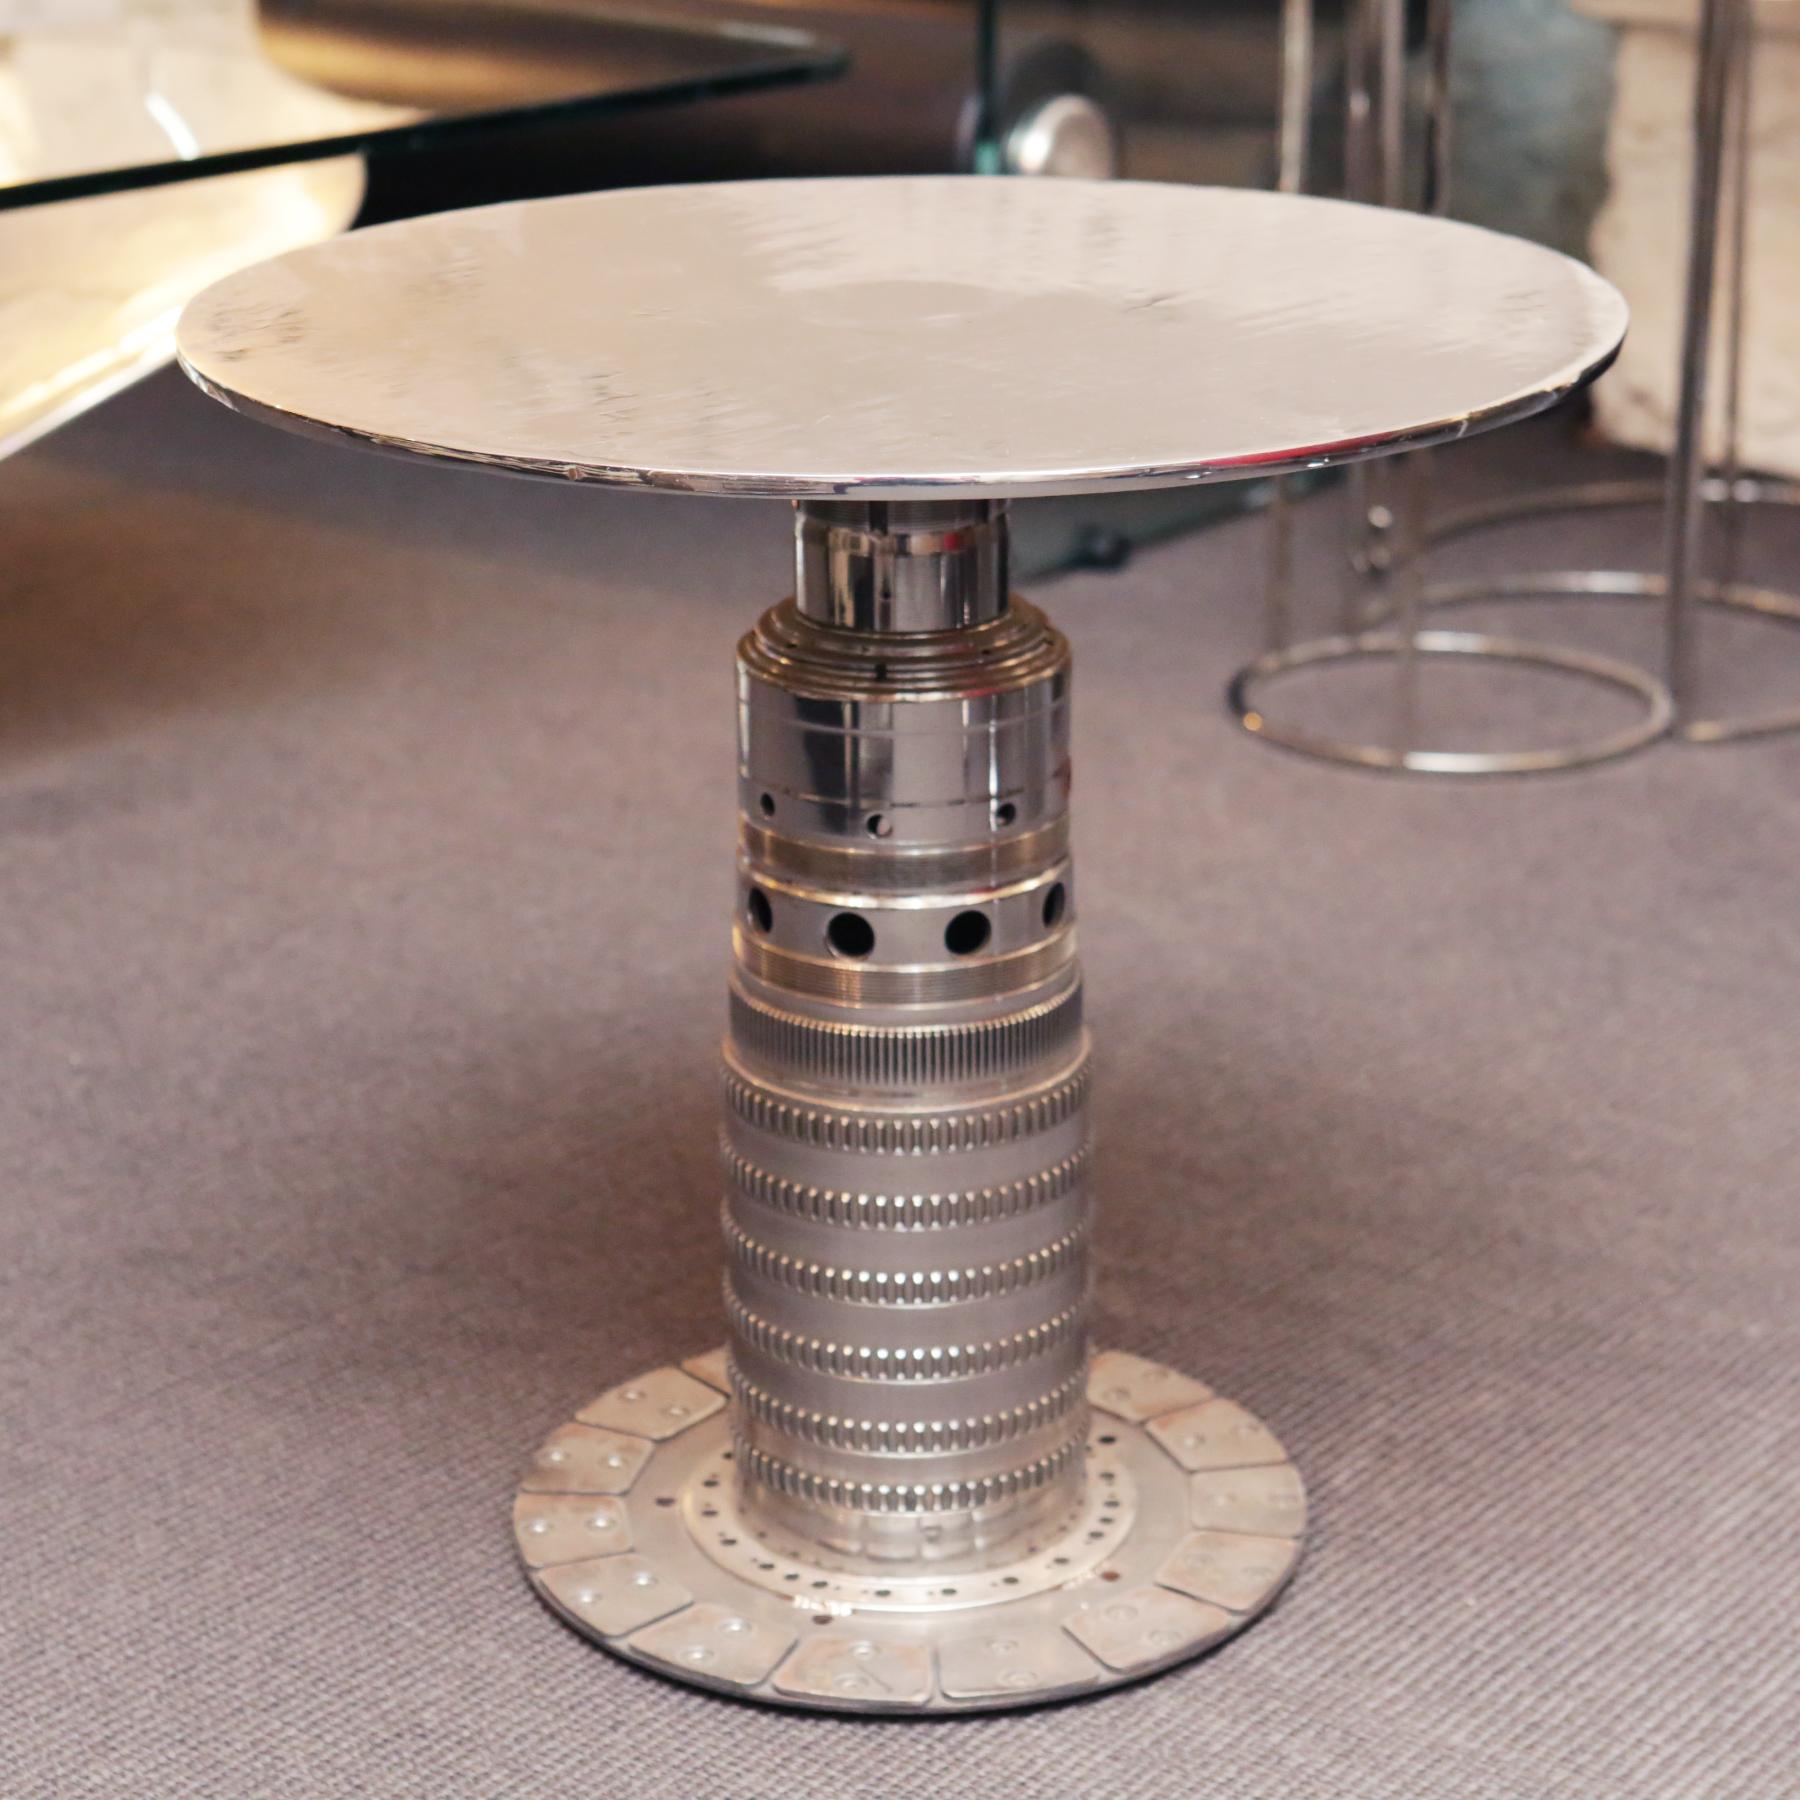 Side table Boeing Engine part CFM56 made
with CFM56 engine part in titanium nickel and
aluminium alloy. From Boeing 737 and Airbus A320,
with polished aluminium top. Exceptional piece.